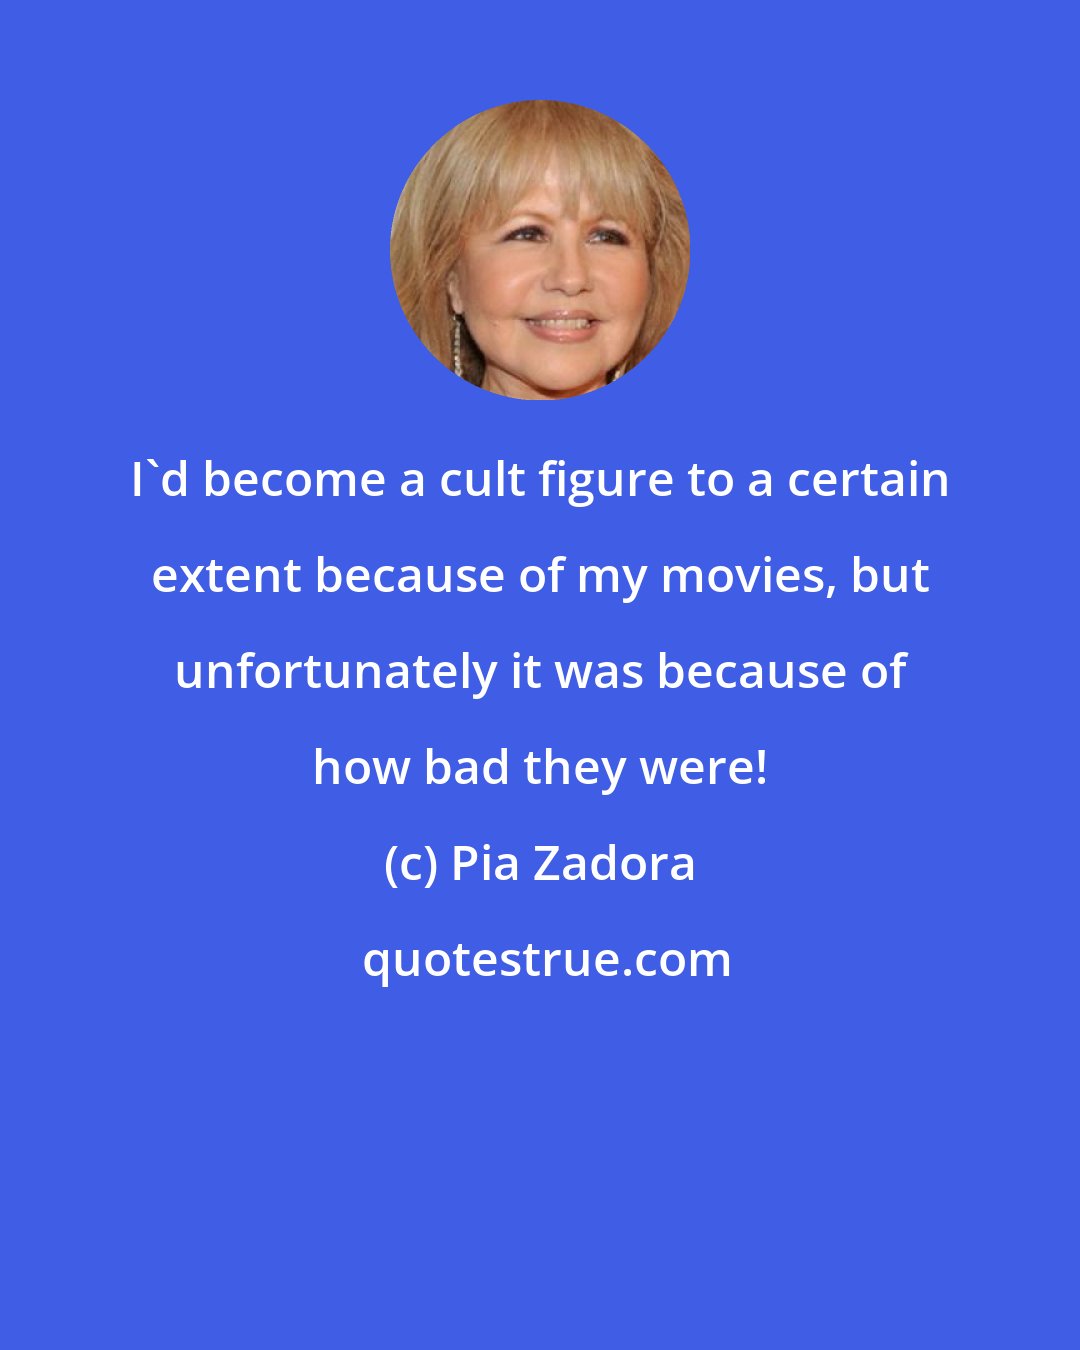 Pia Zadora: I'd become a cult figure to a certain extent because of my movies, but unfortunately it was because of how bad they were!